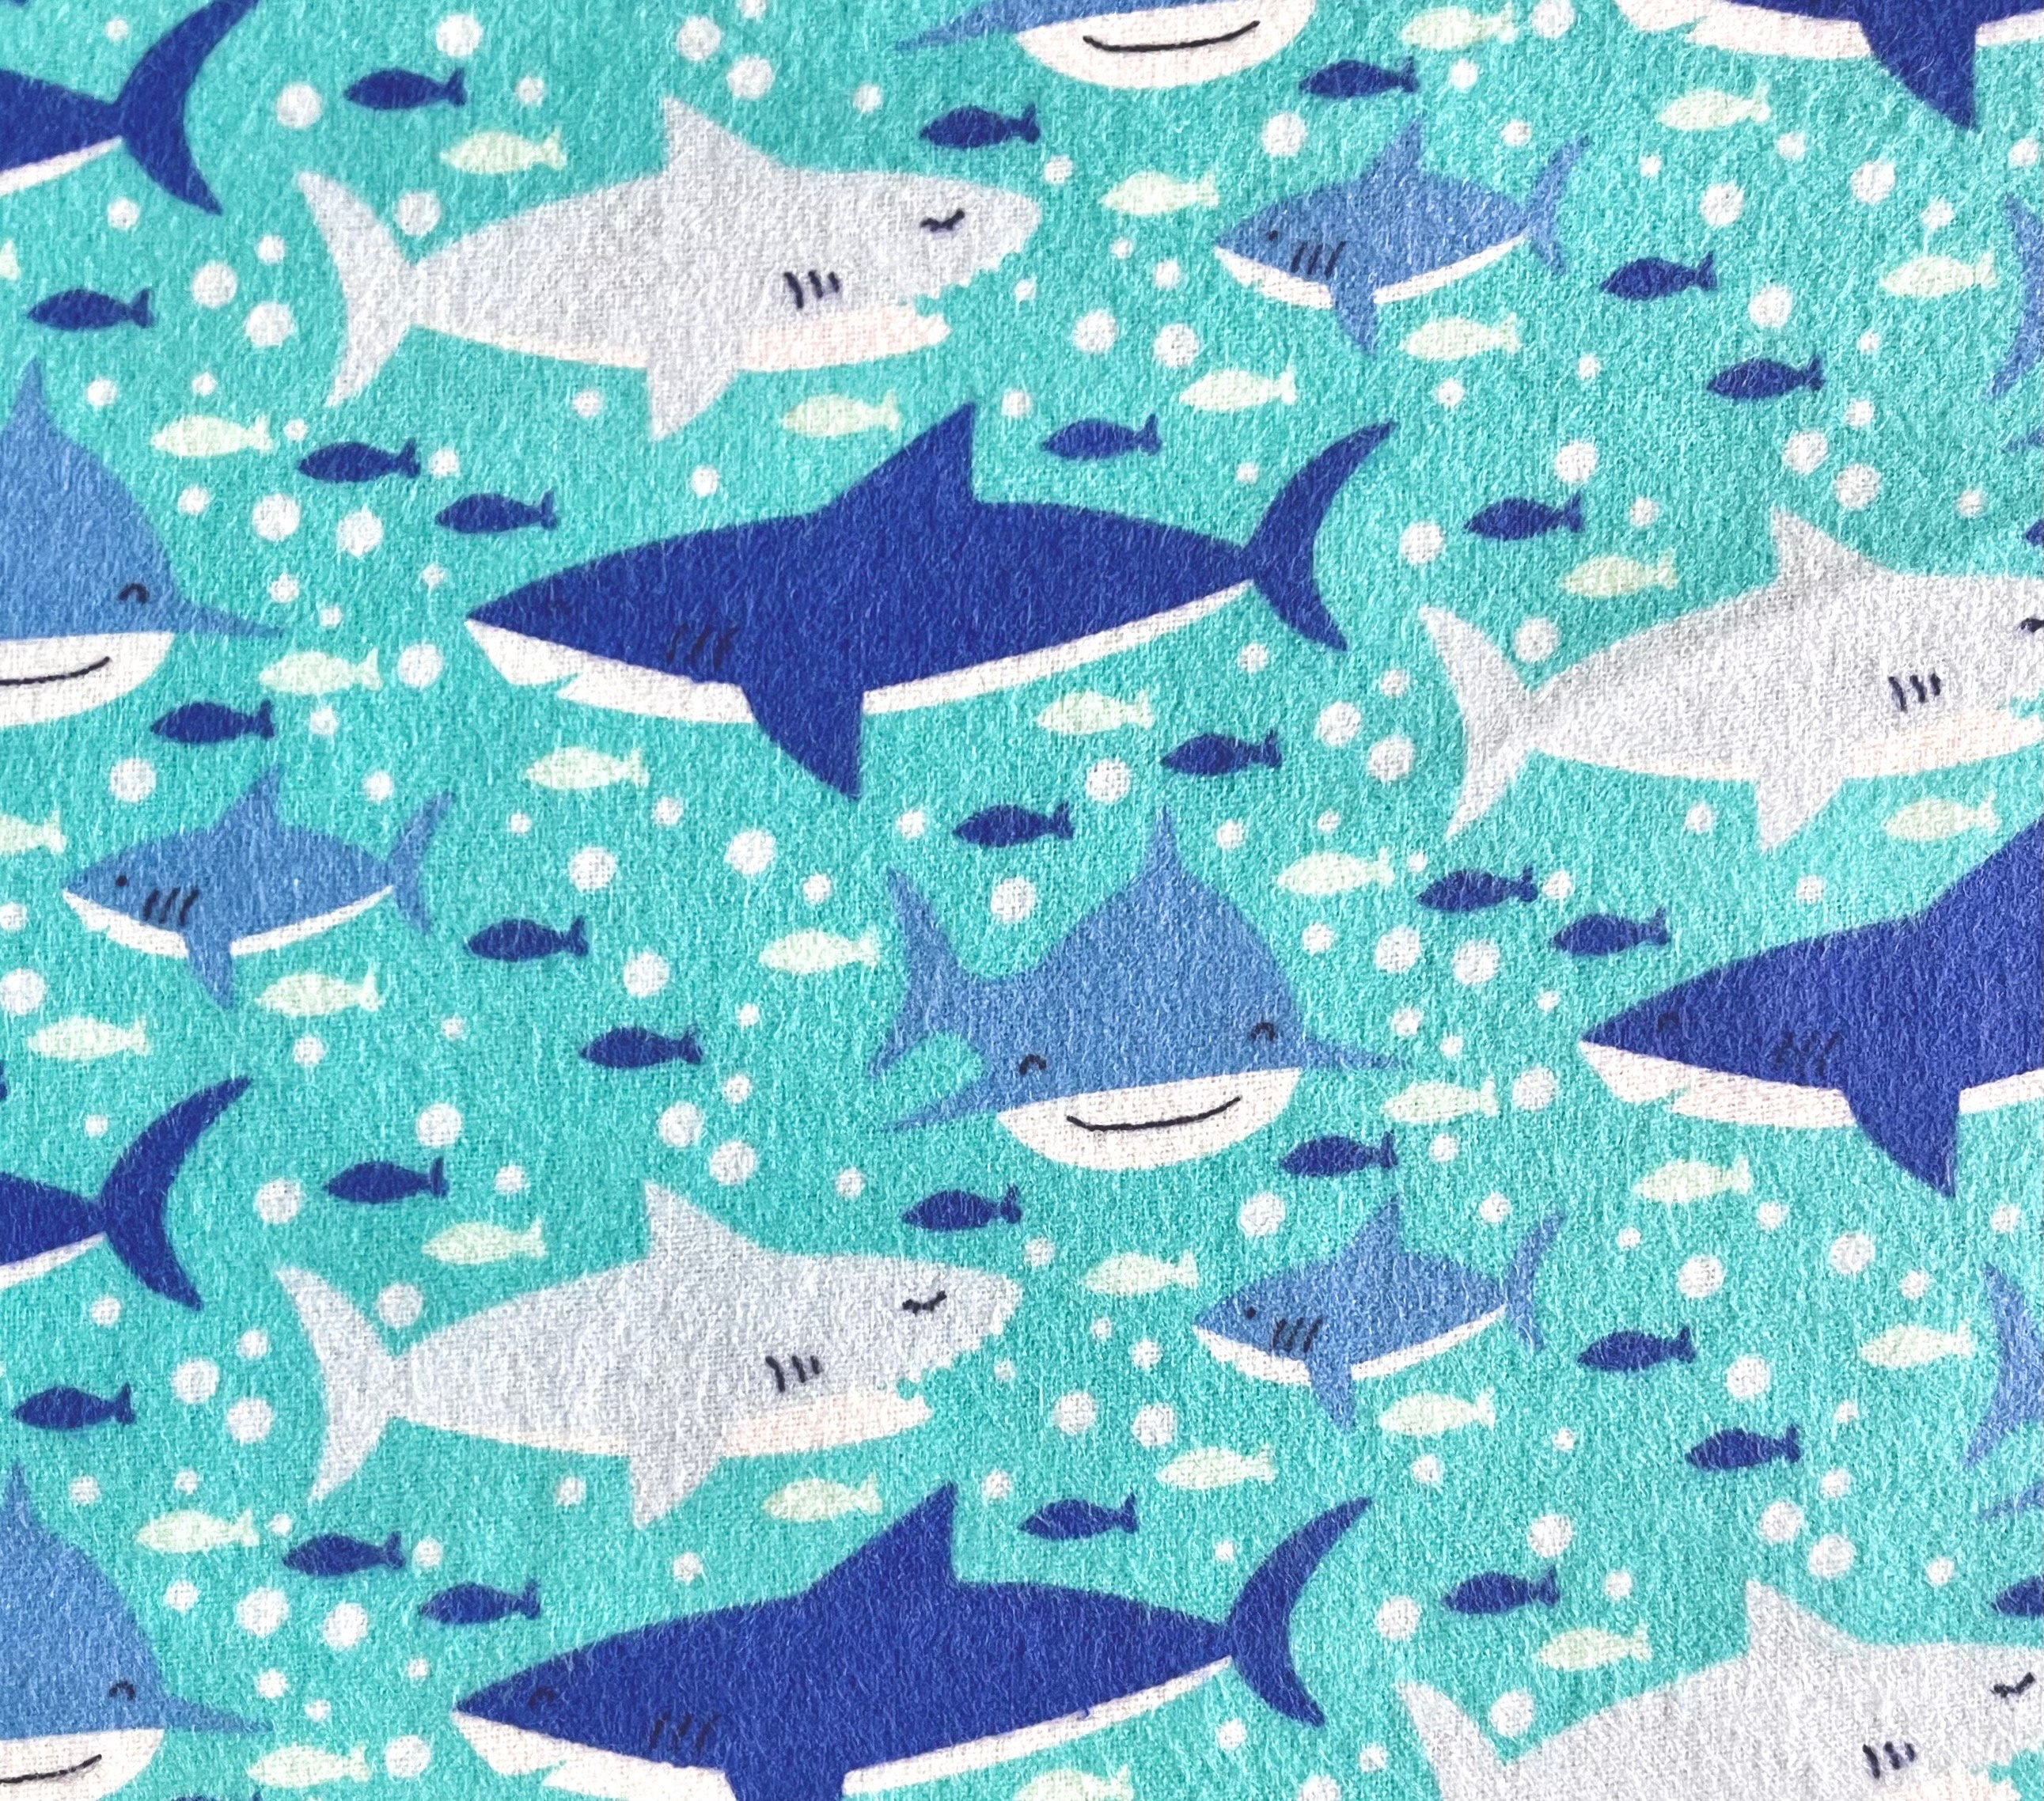 Sea Life Sharks on Aqua Flannel Fabric by the Yard 100% Cotton by